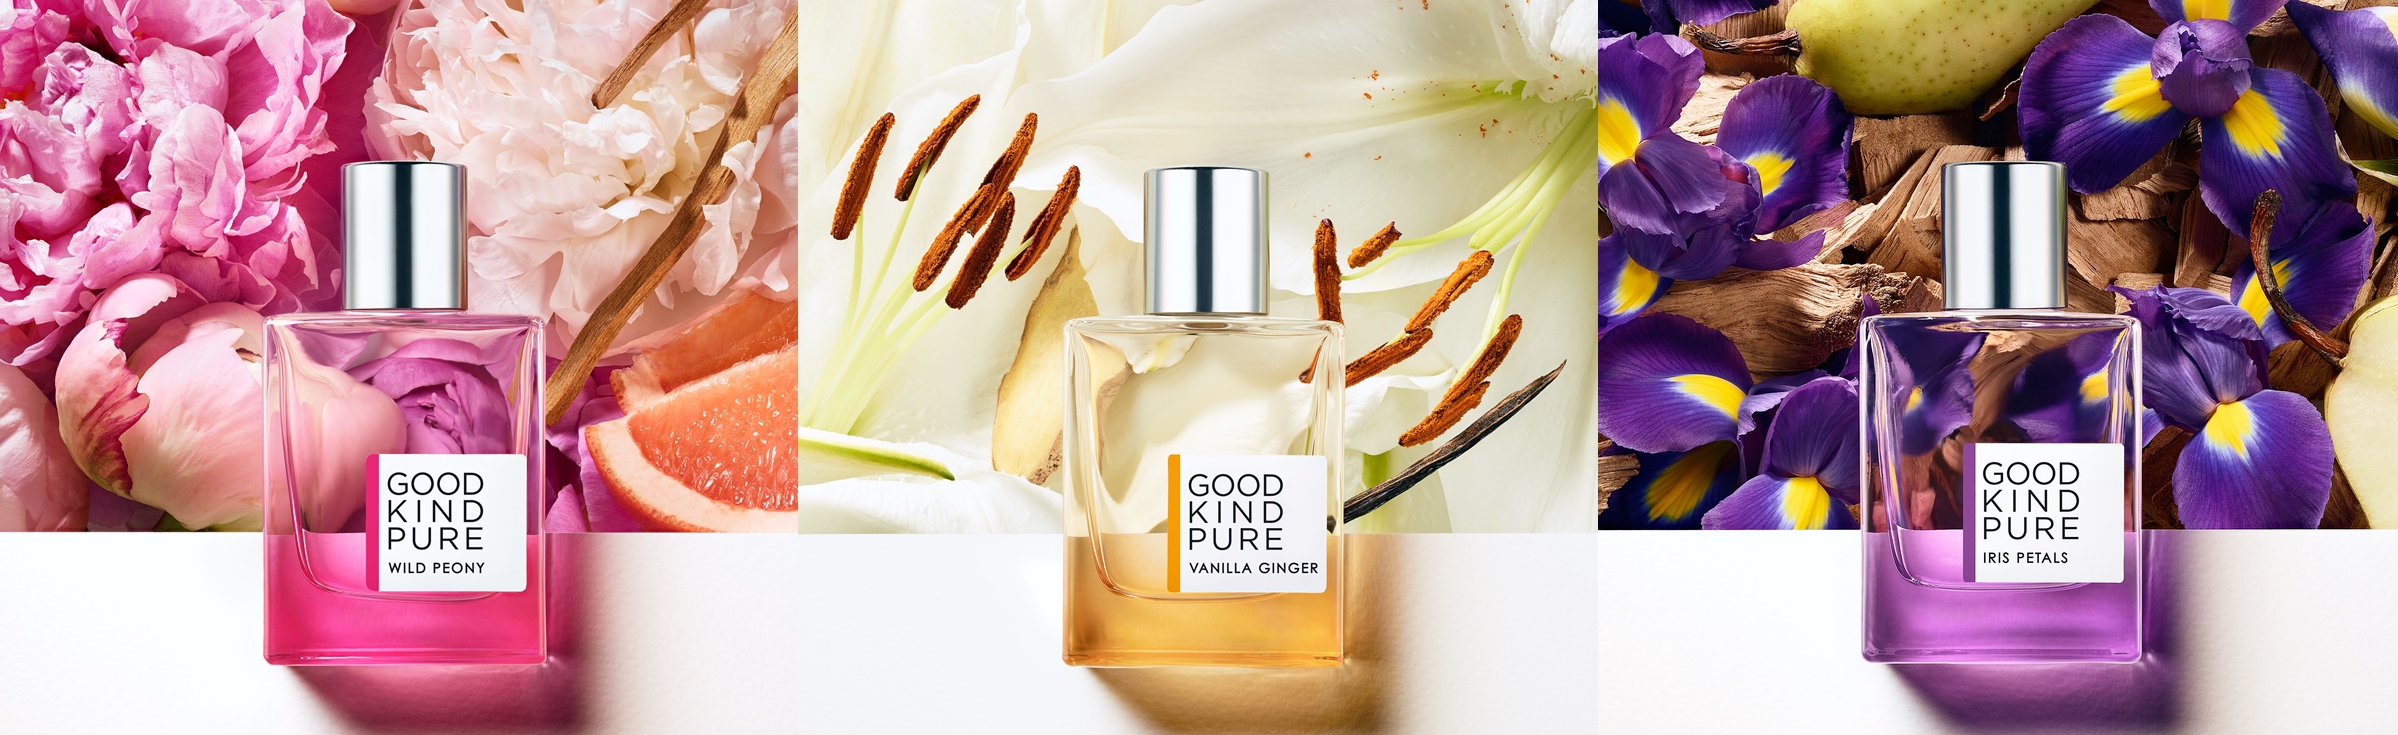 Good Kind Pure: NEW Fragrances That Are Clean, Vegan, & FSC Certified